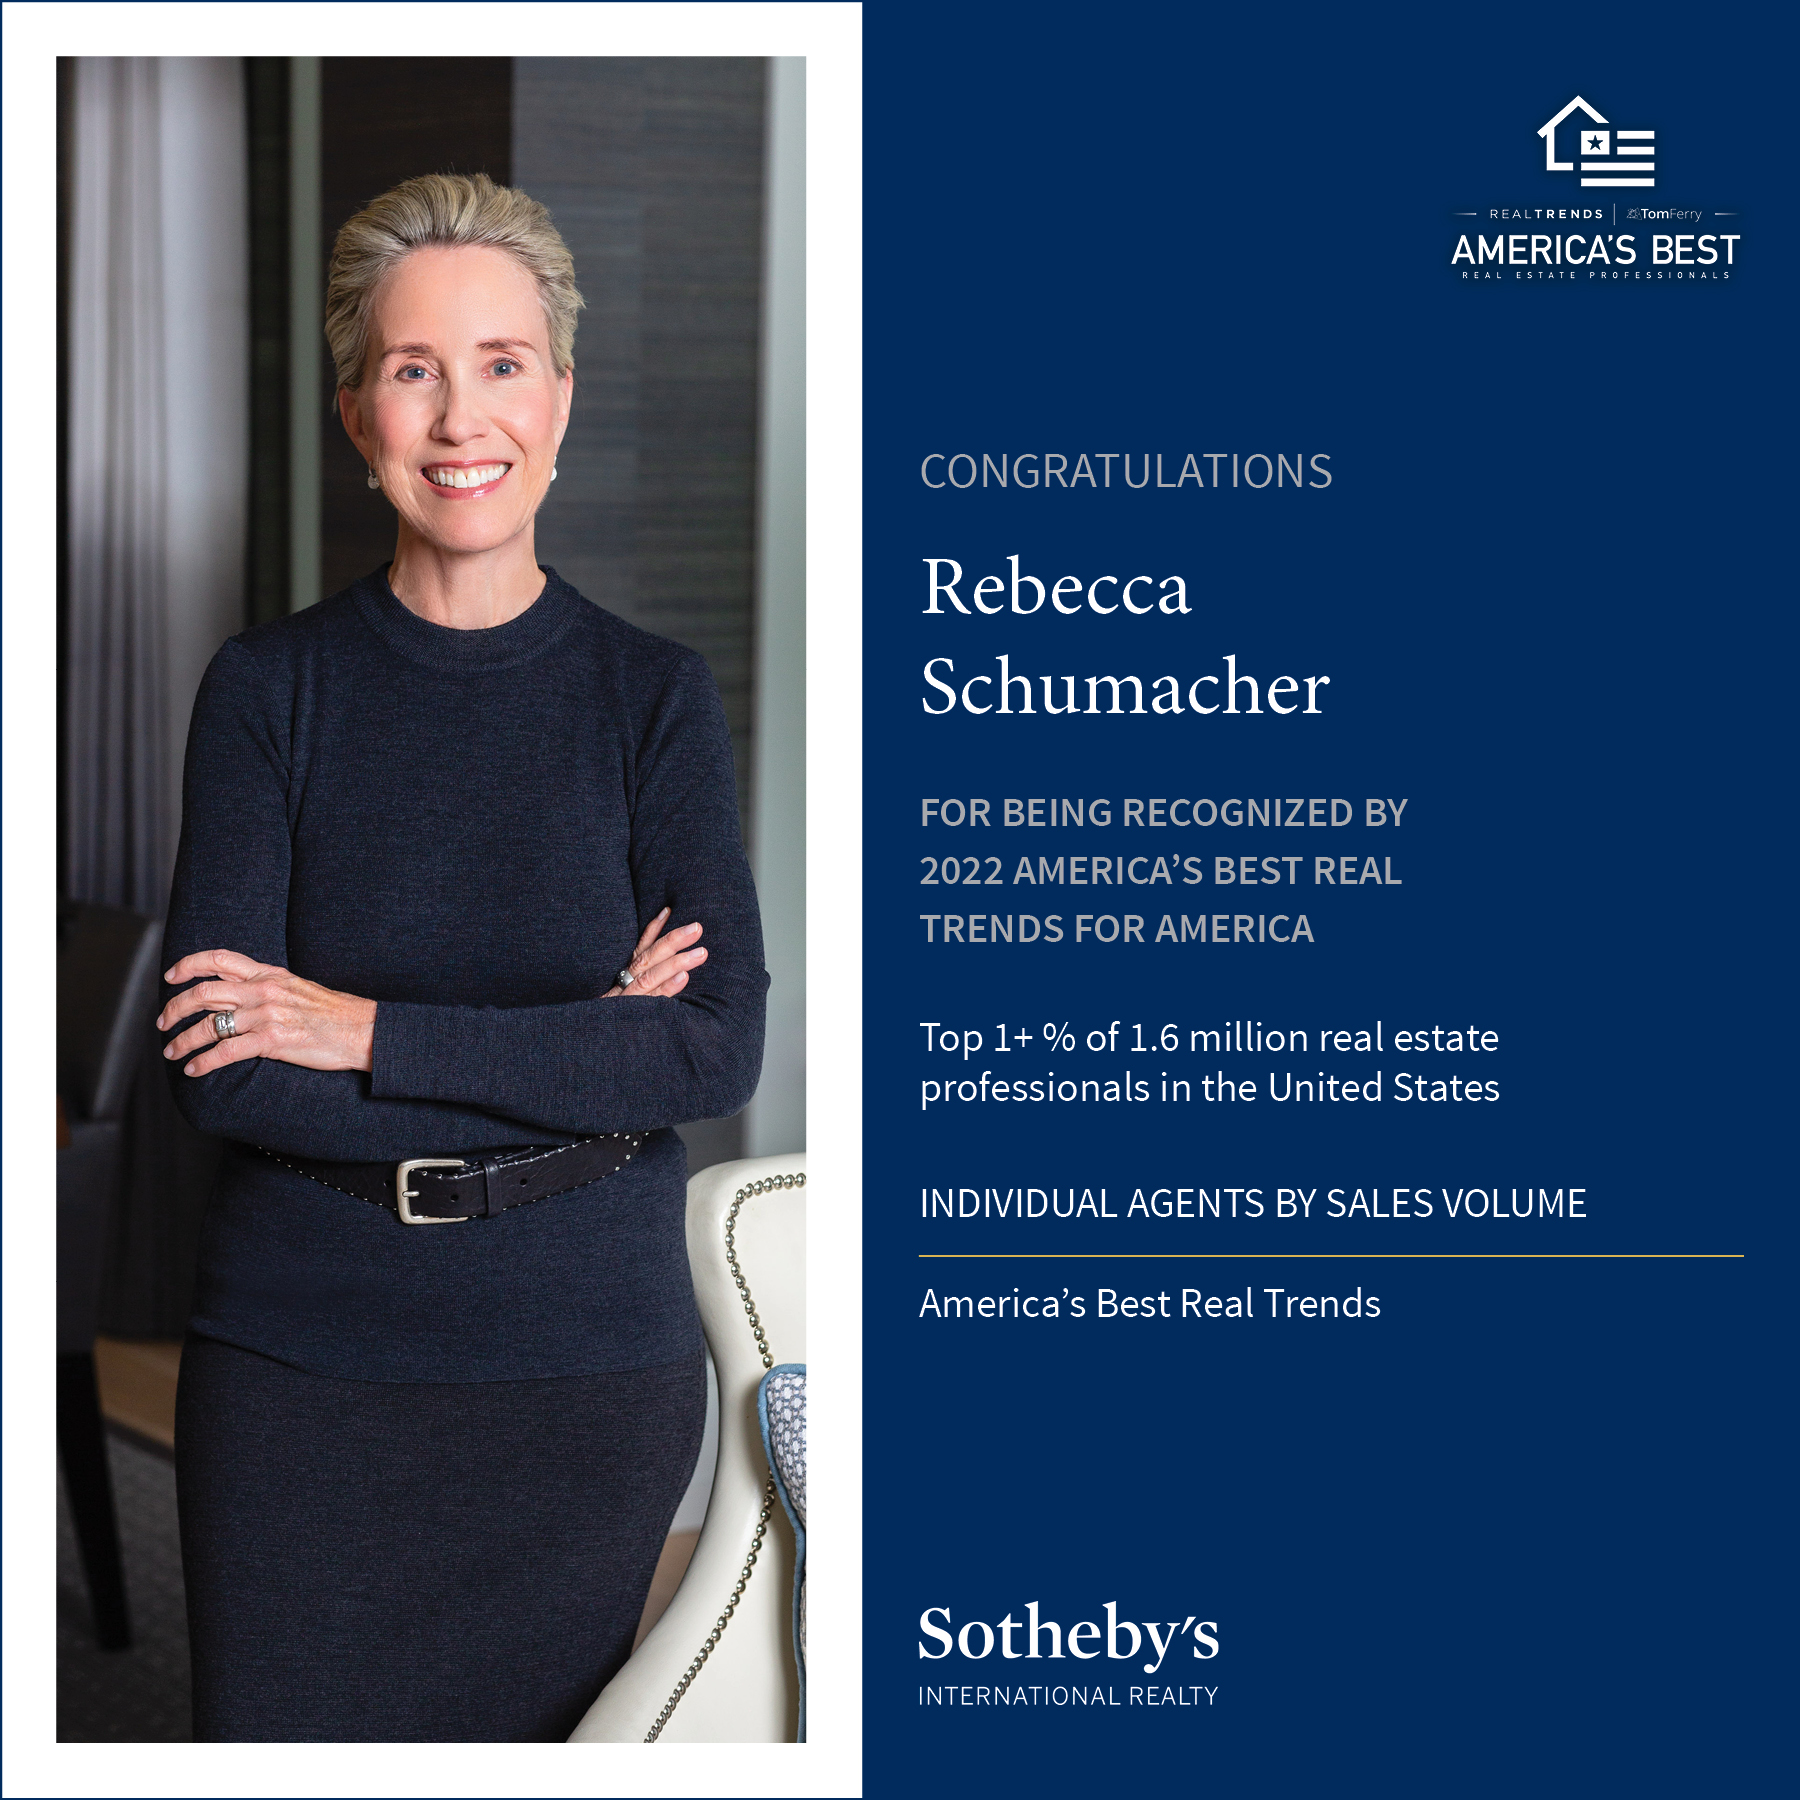 Rebecca Schumacher Named to Real Trends "America’s Best" List | 2022